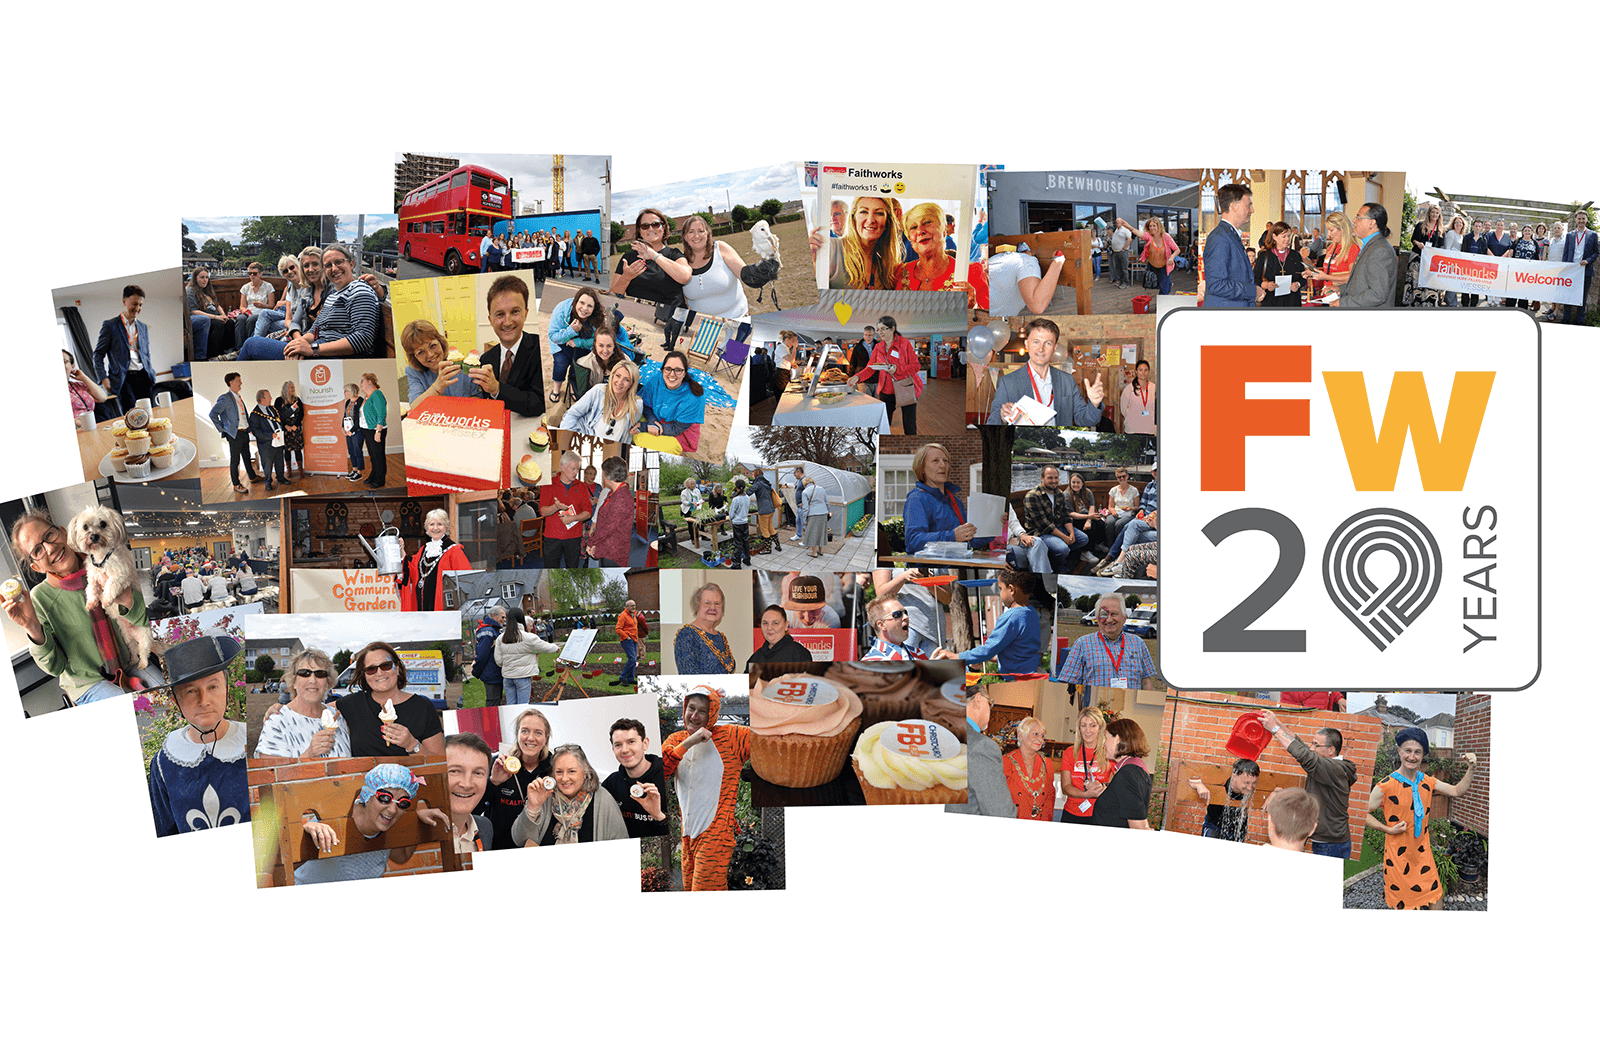 Collage of photos with a logo saying "FW20 years"